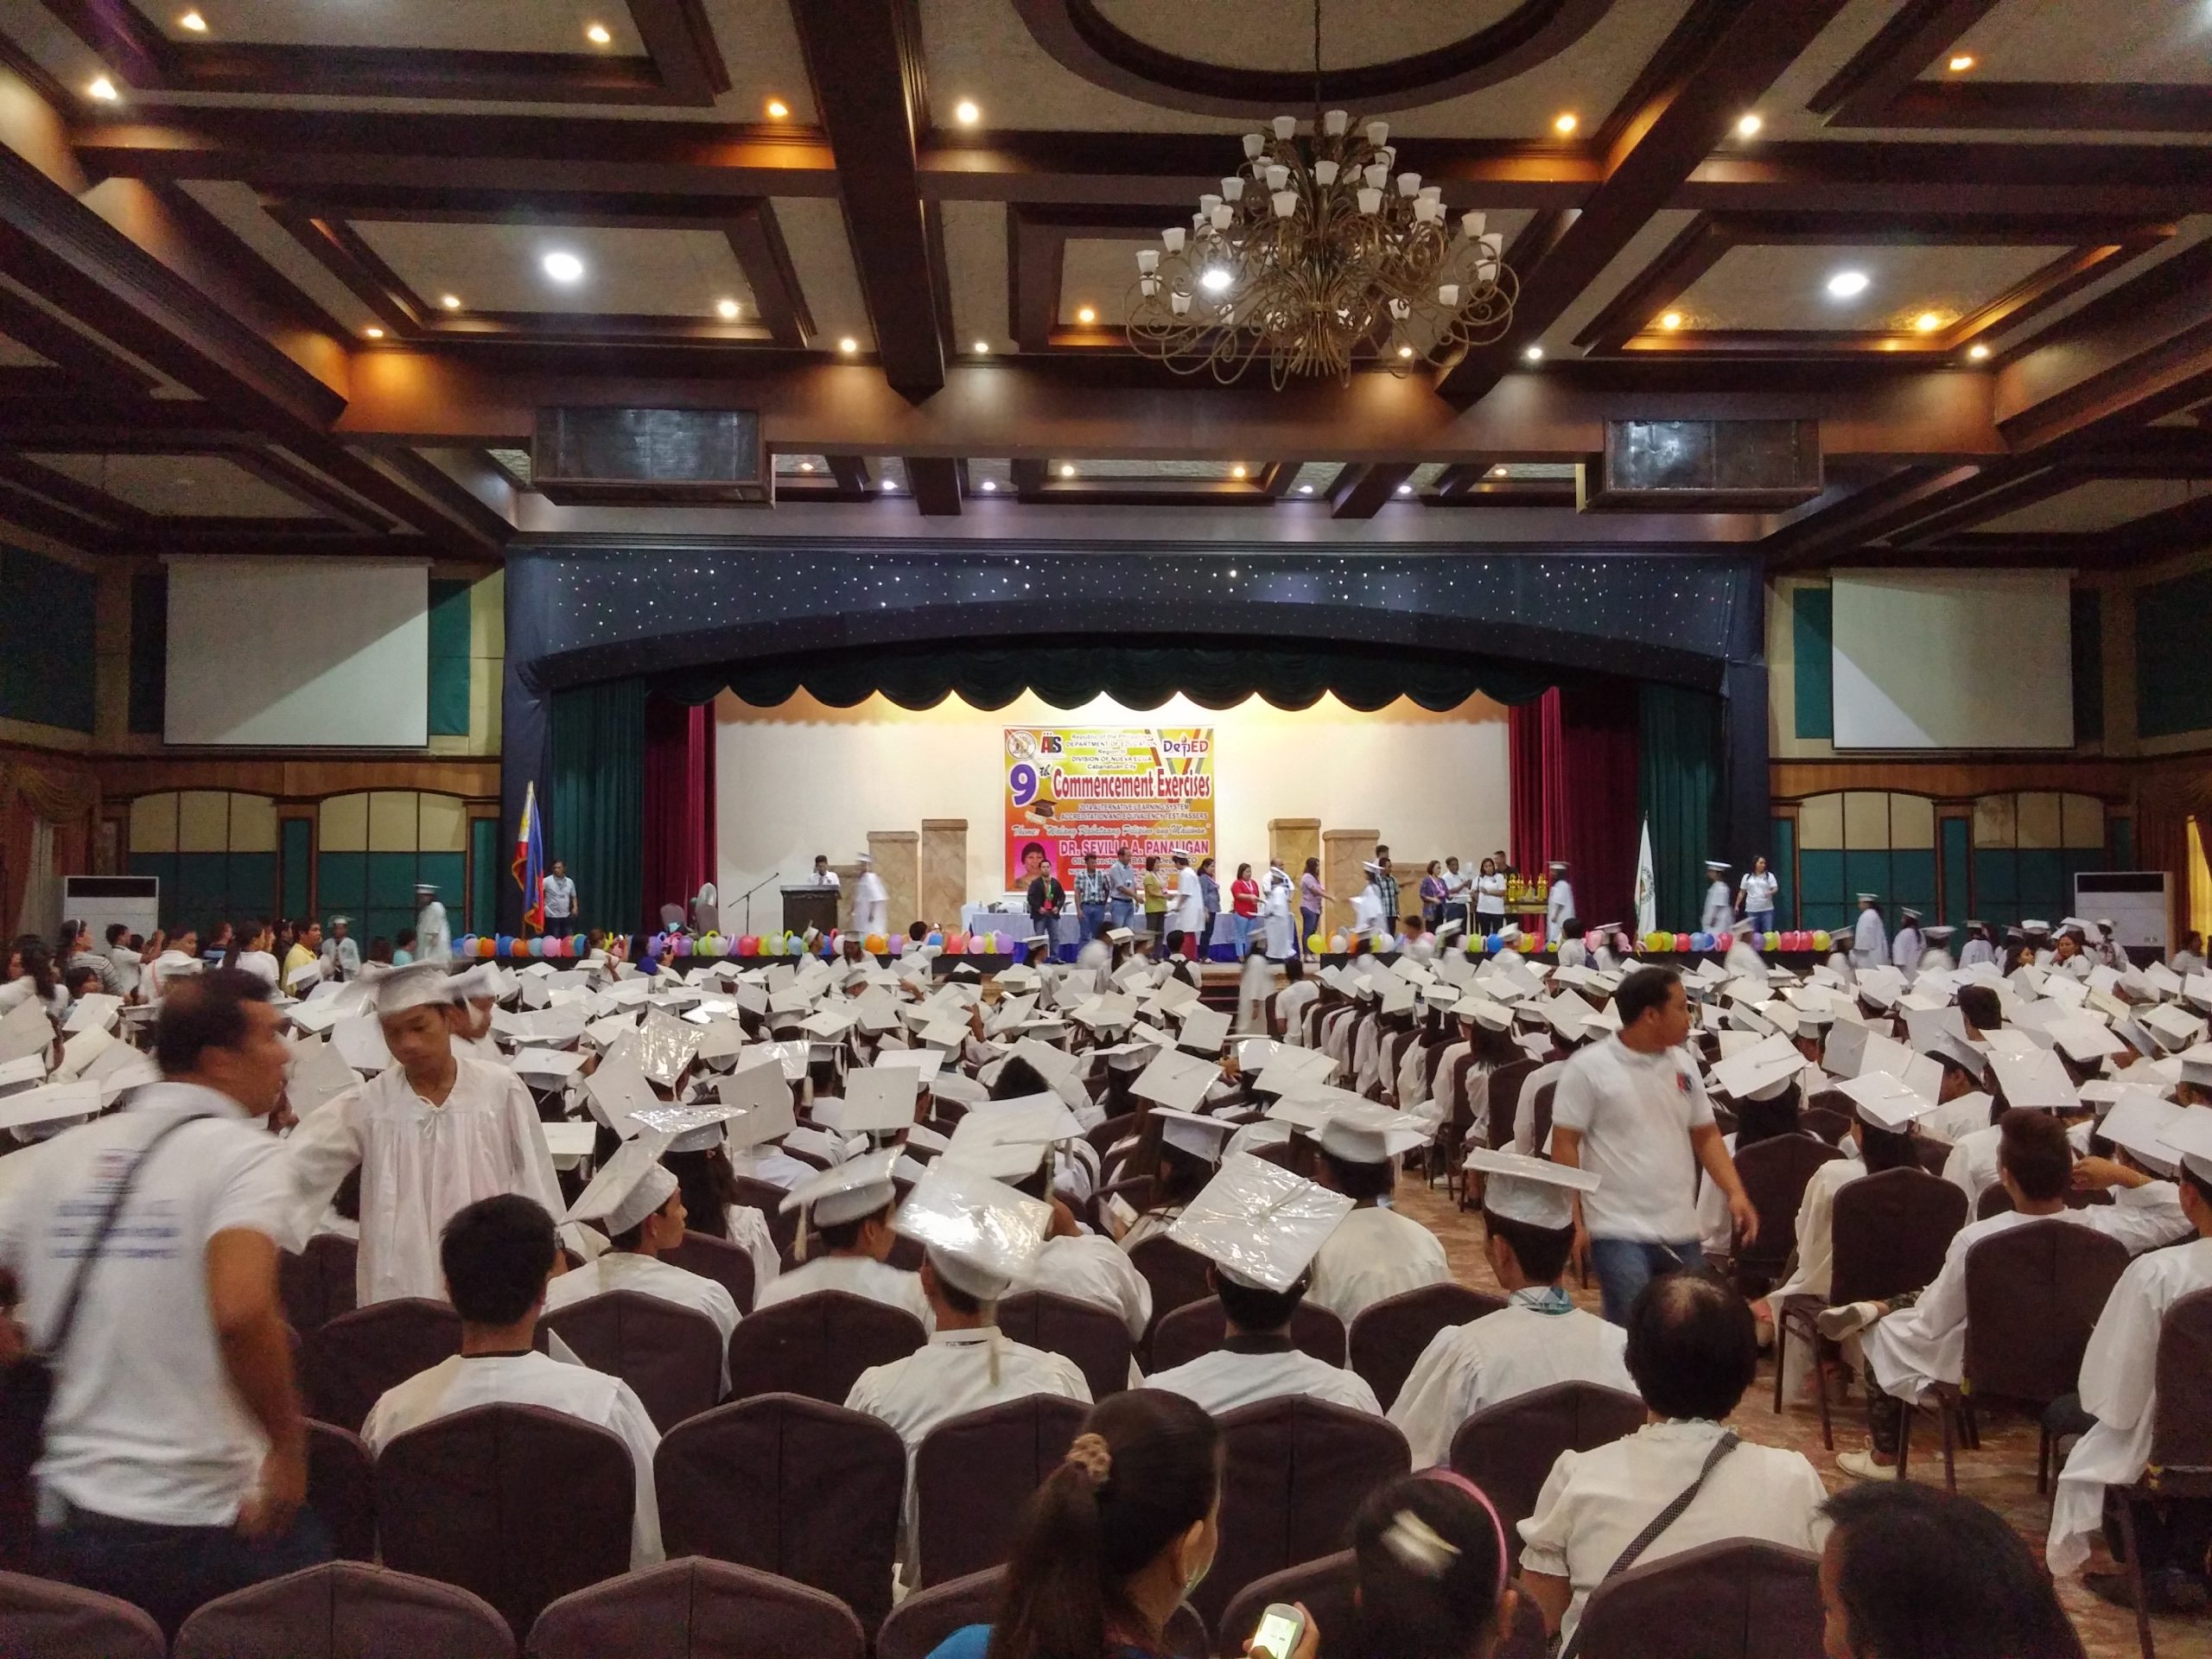 Graduation ceremony in progress with students in white caps and gowns seated facing a decorated stage.